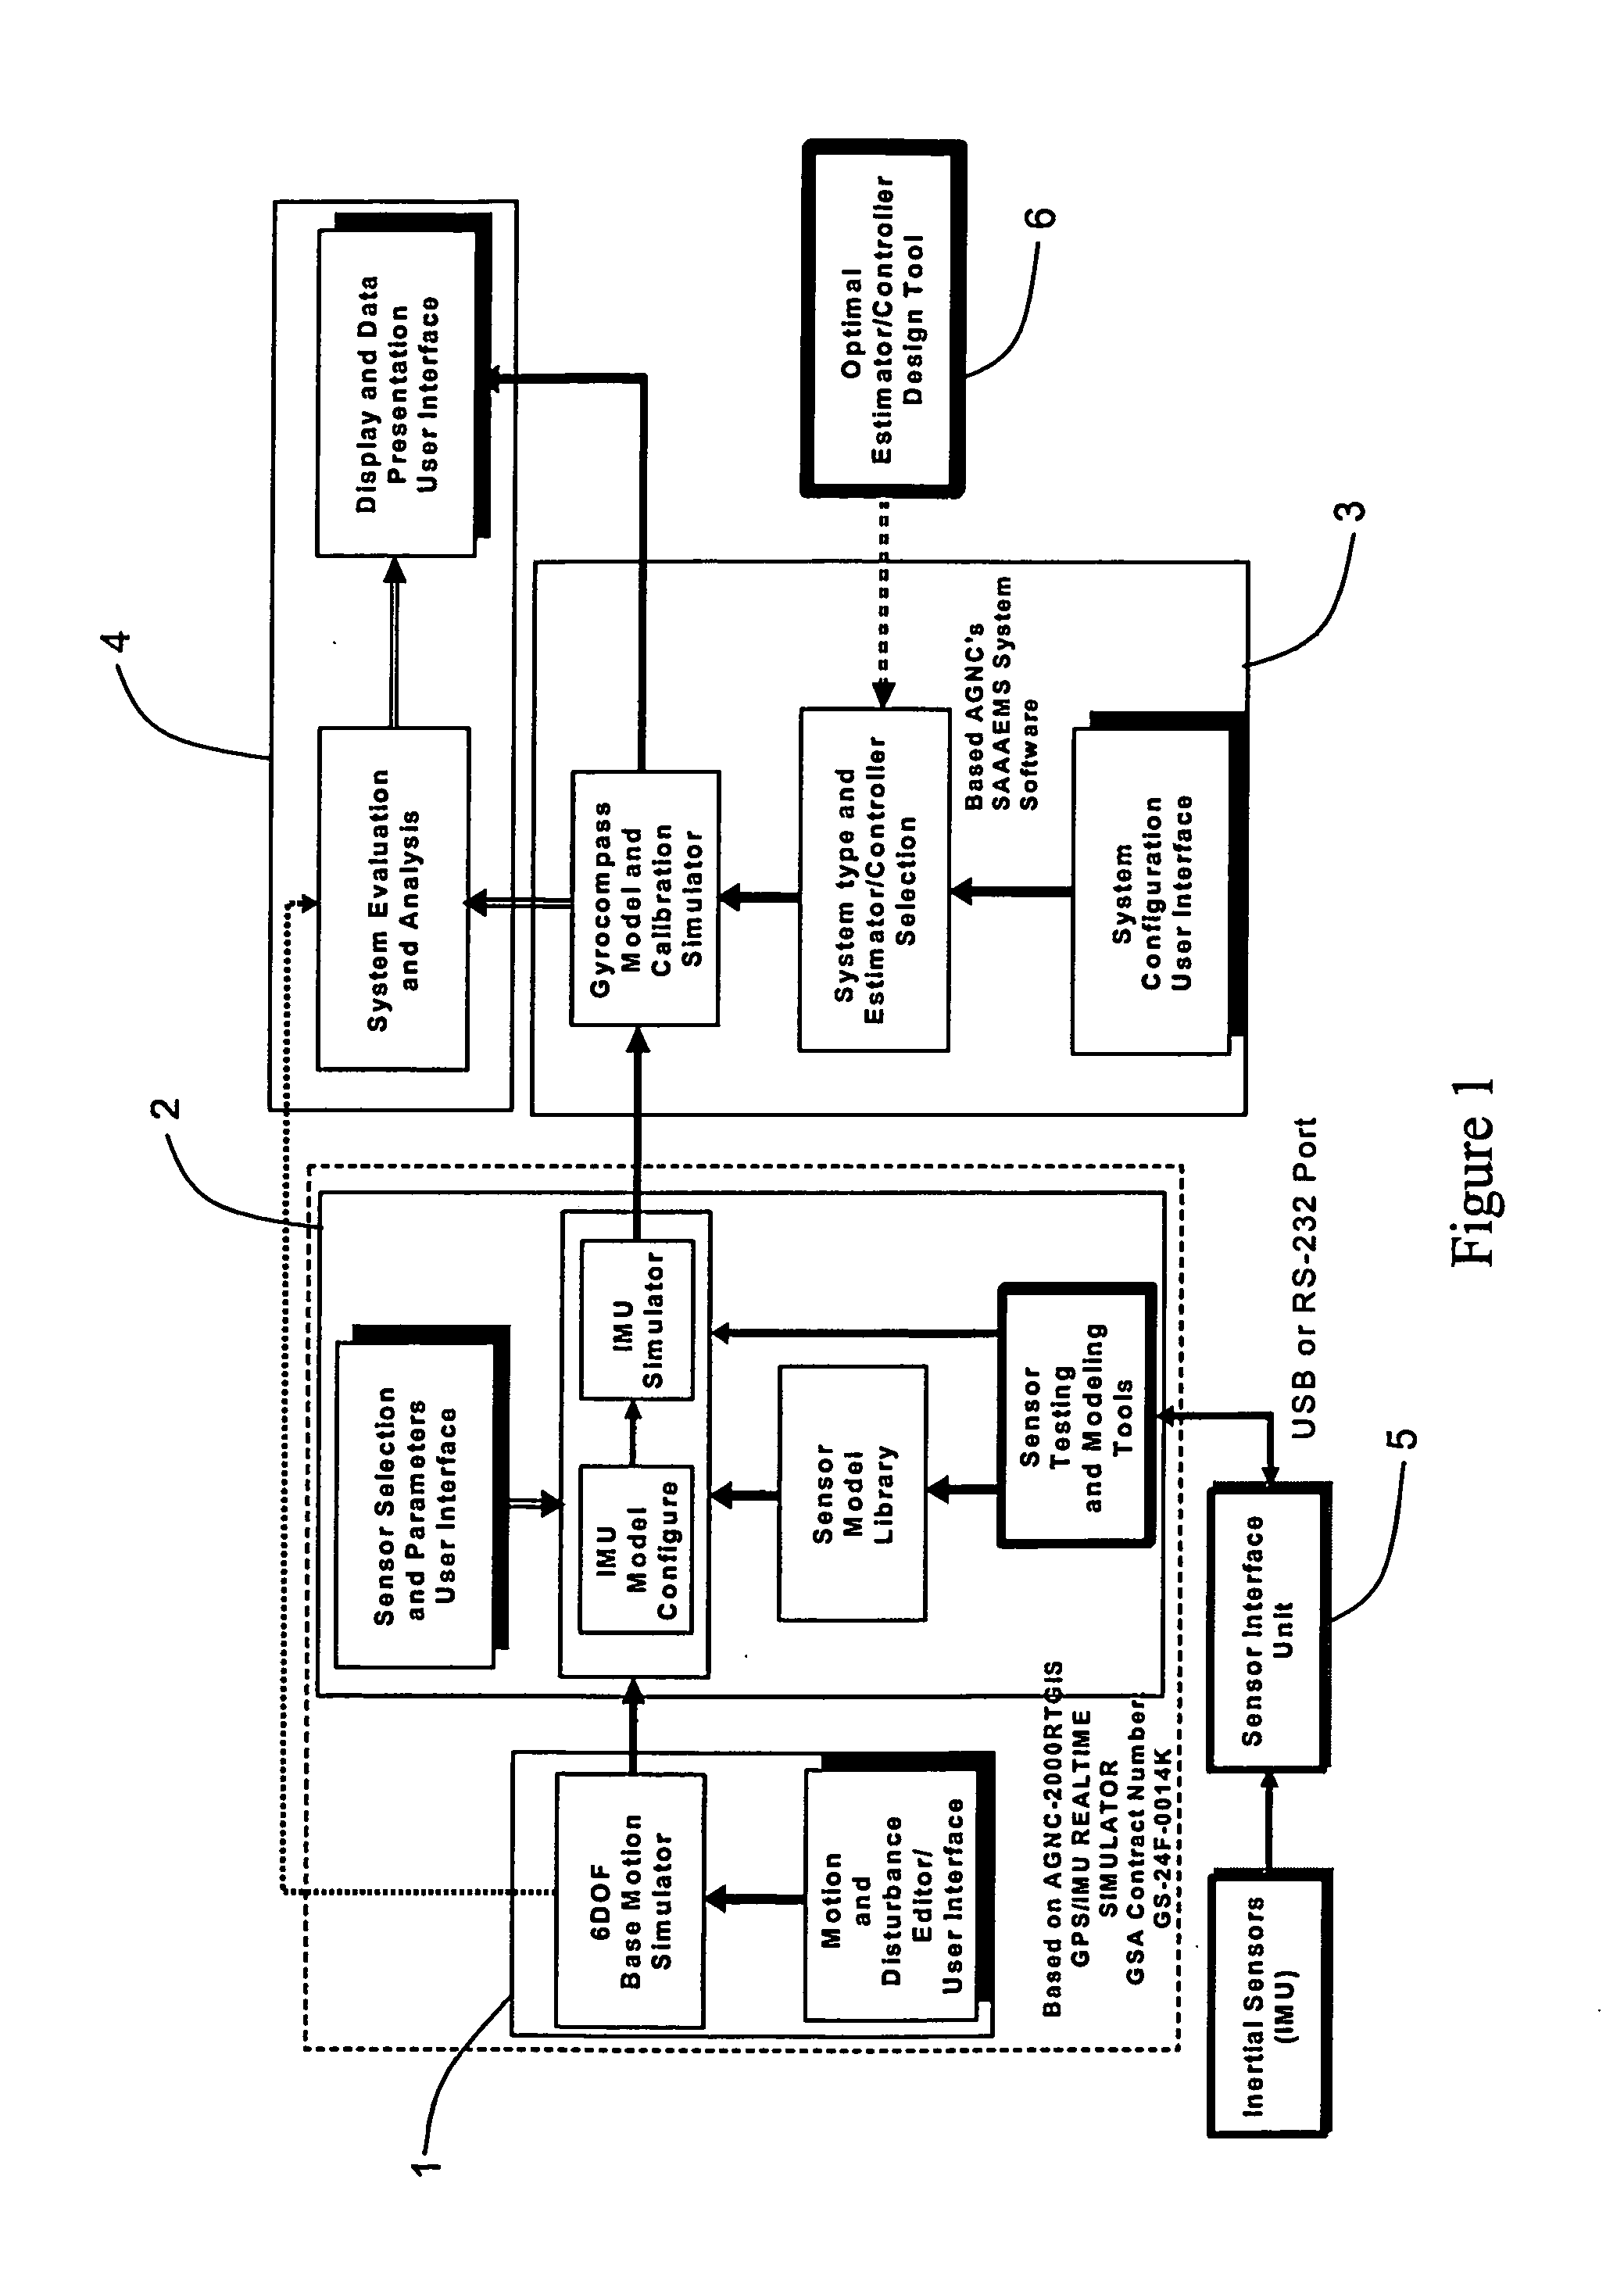 Gyrocompass modeling and simulation system (GMSS) and method thereof